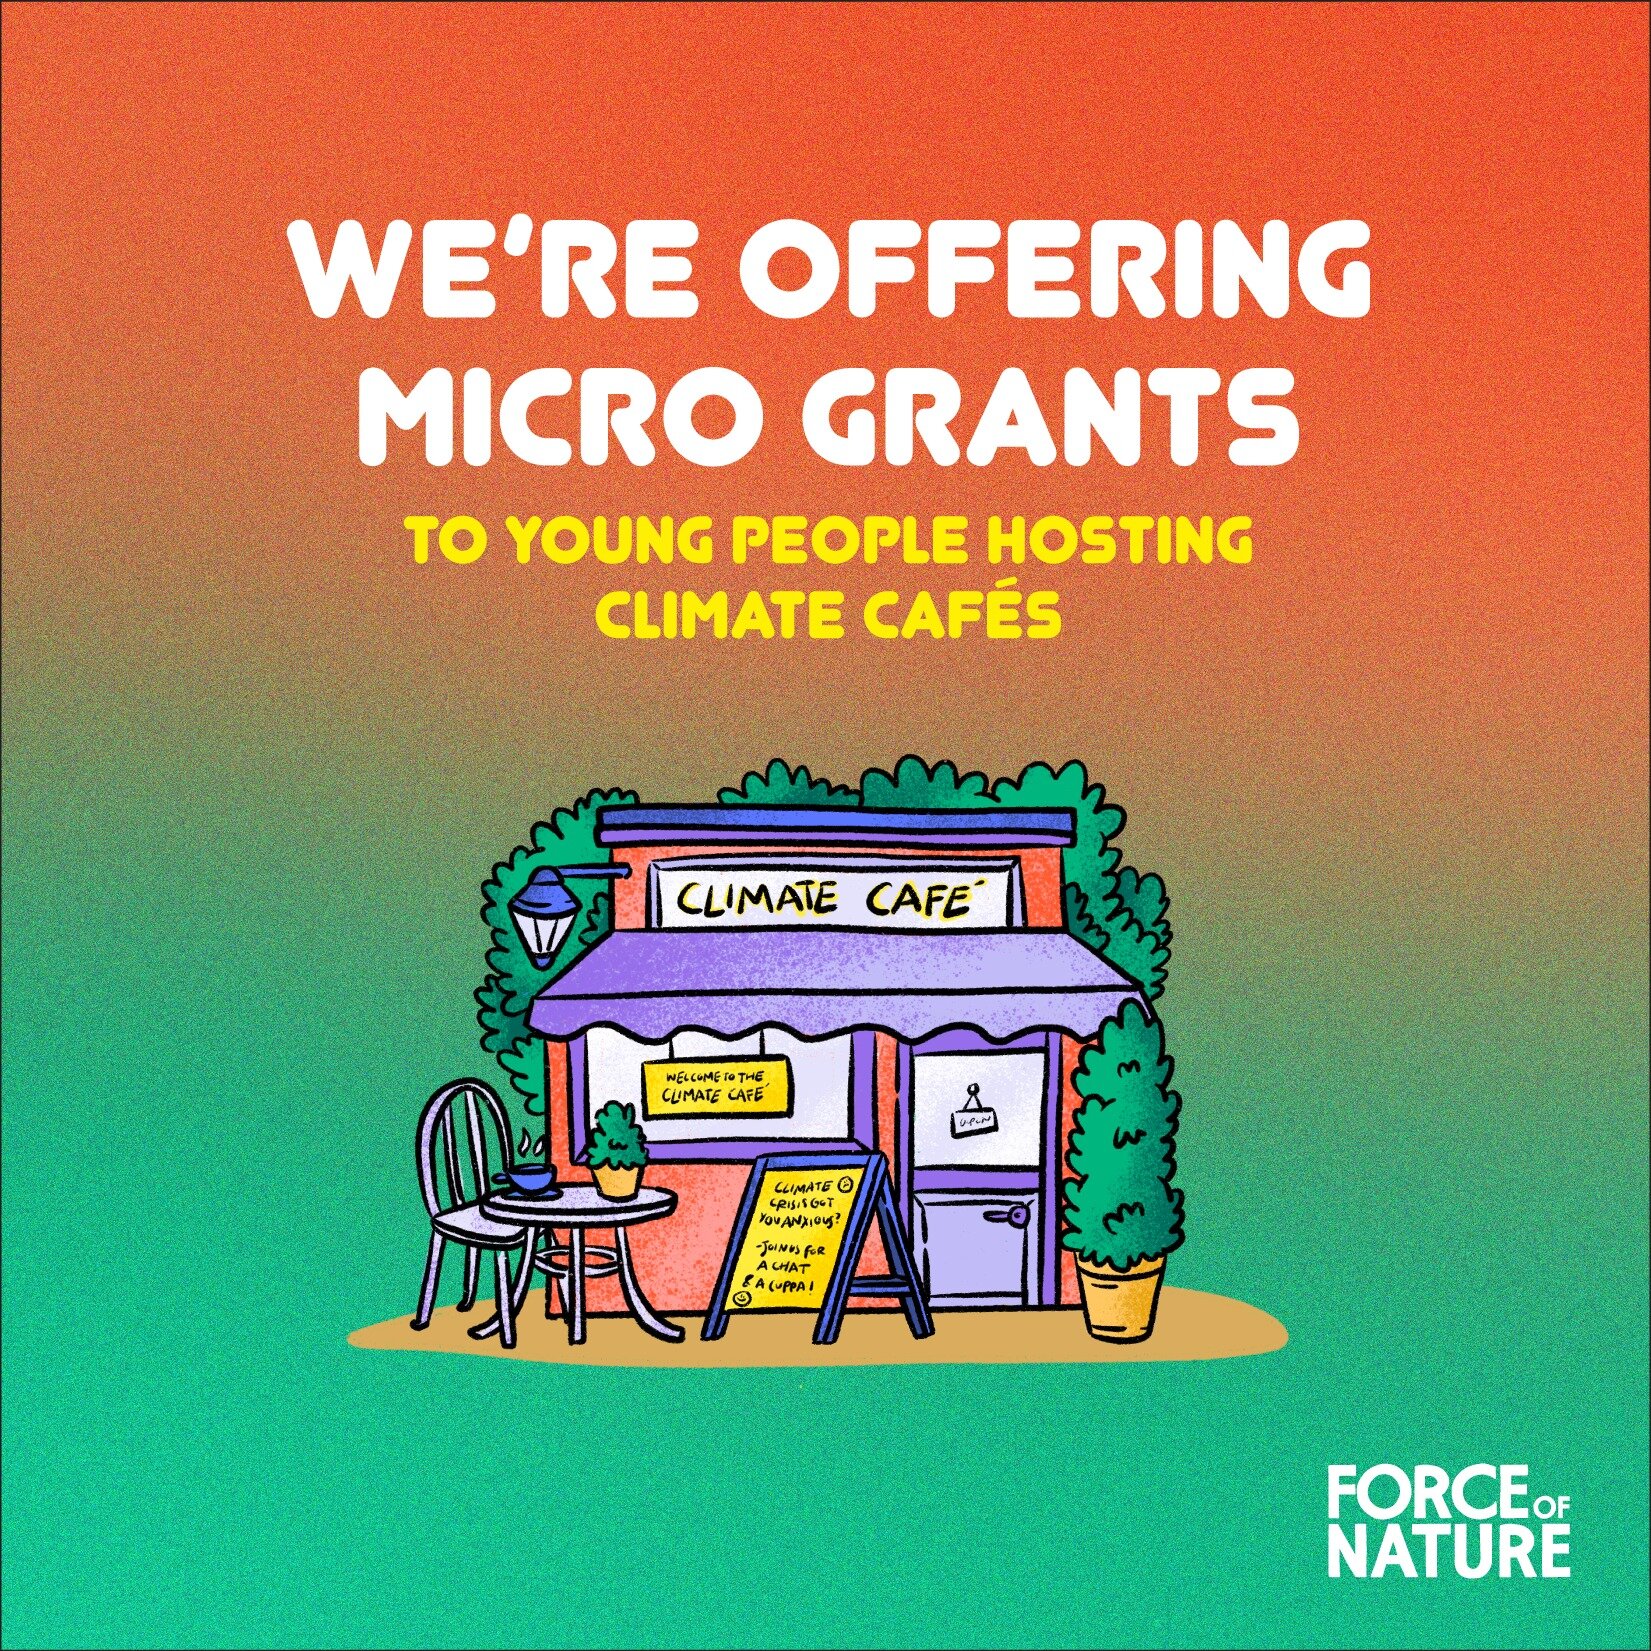 Do you want to host a #ClimateCaf&eacute; but face financial barriers to do so? We&rsquo;re offering micro-grants of up to &pound;150 to help cover the costs.

Over 100 people have signed-up to host a self-organised climate caf&eacute; and we want to